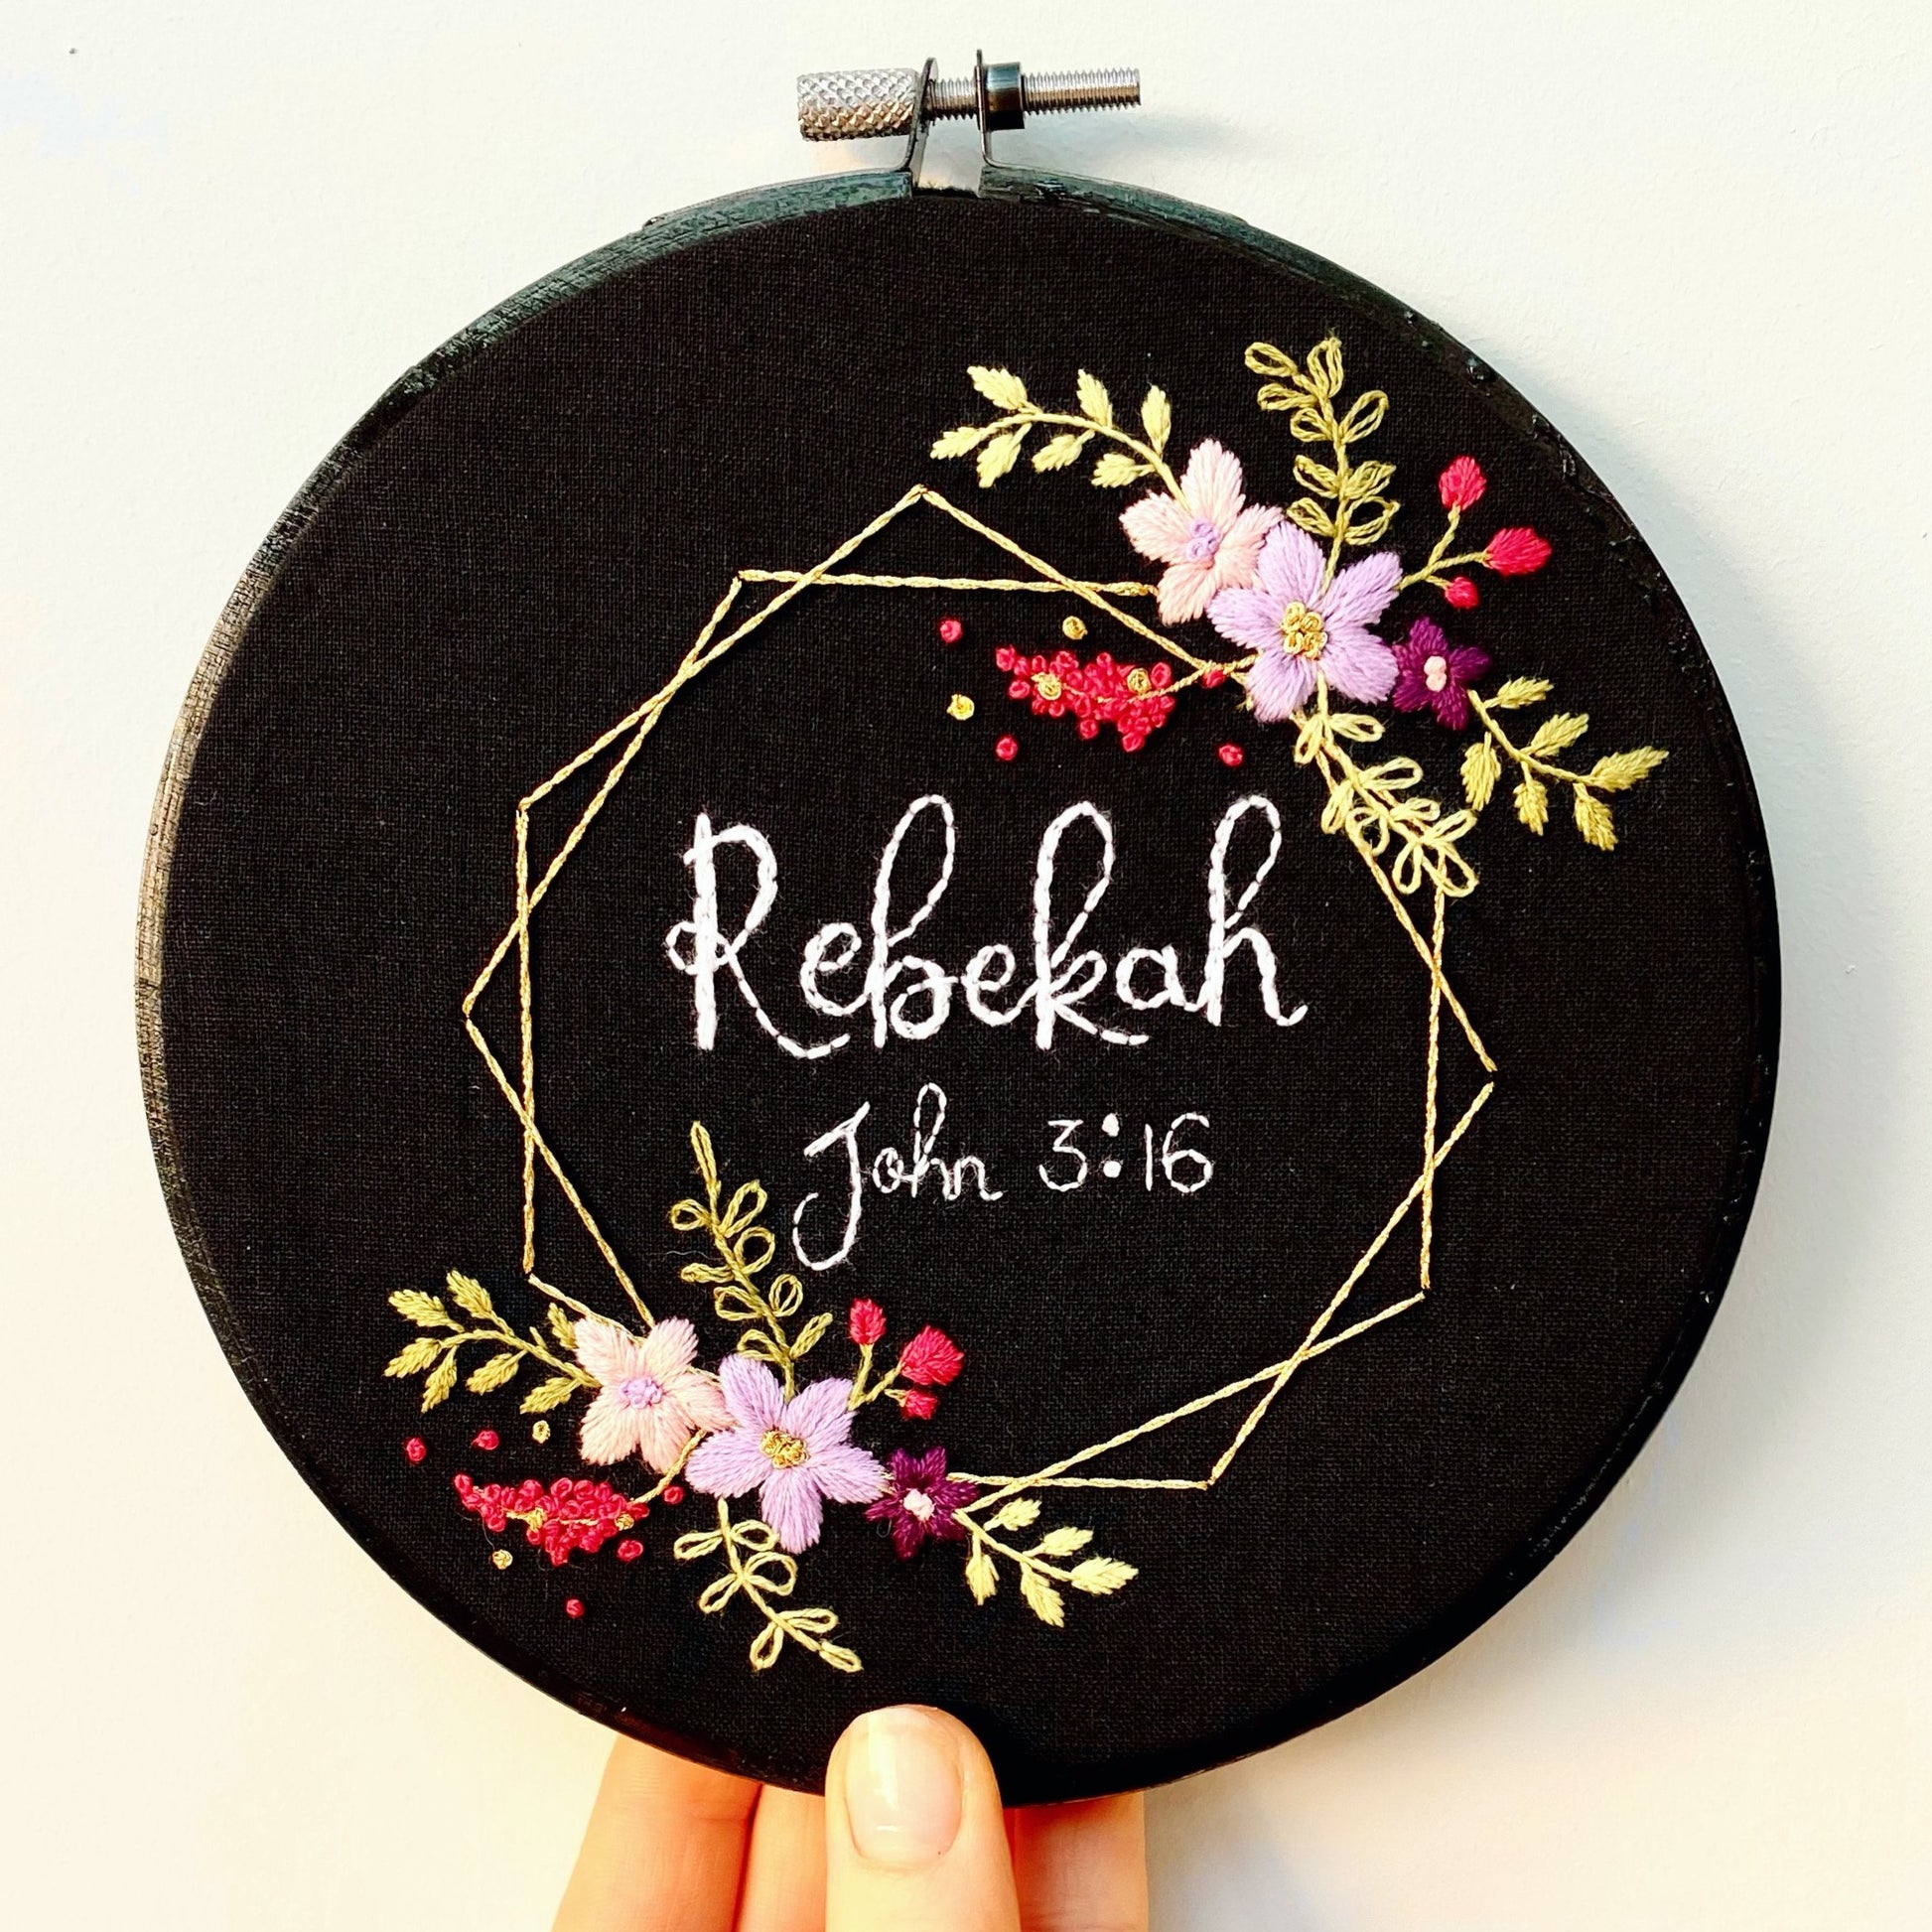 Name & Date embroidery hoop